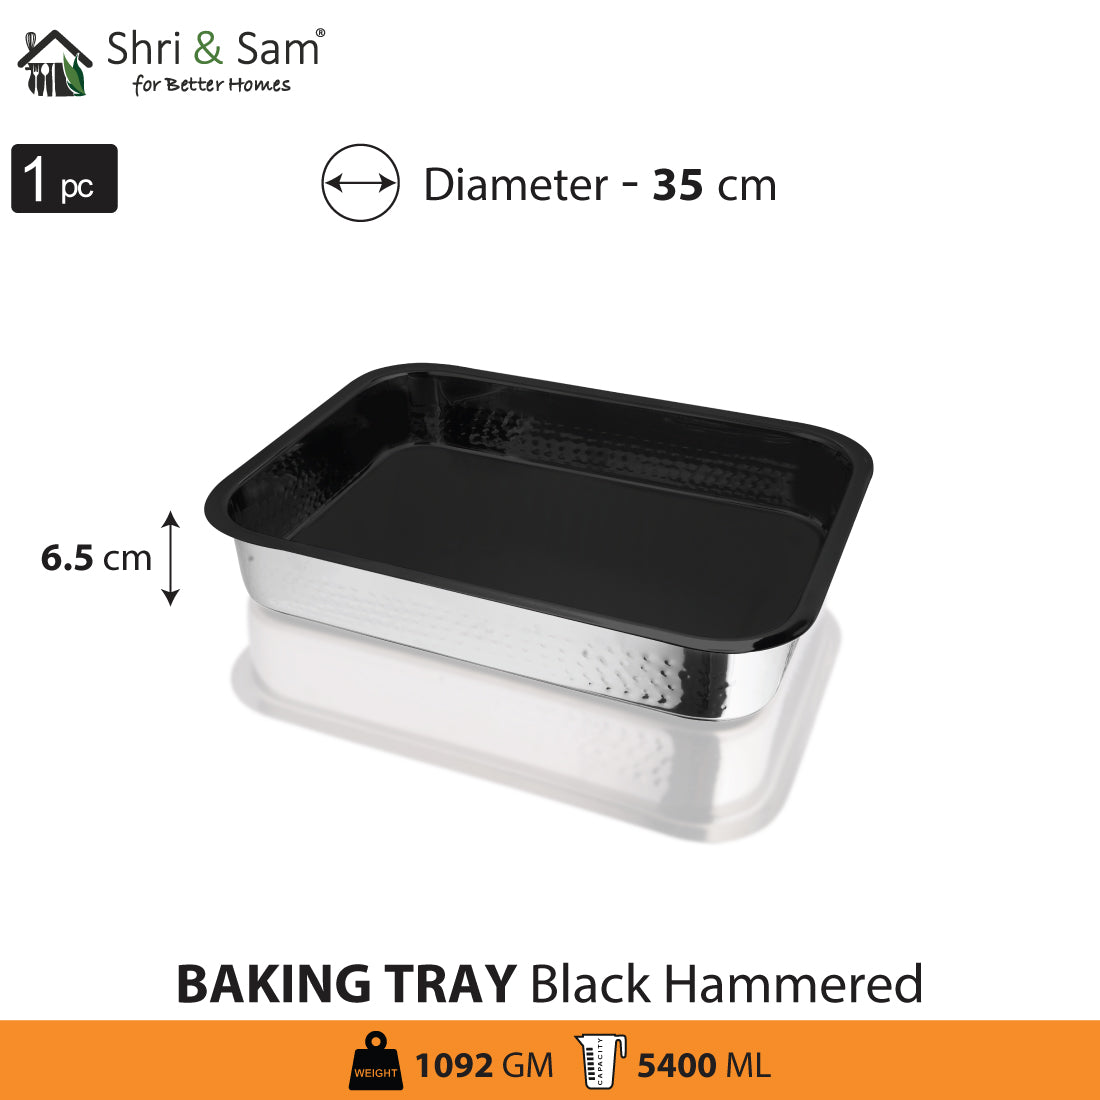 Stainless Steel Hammered Rectangular Baking Tray with Black Coating